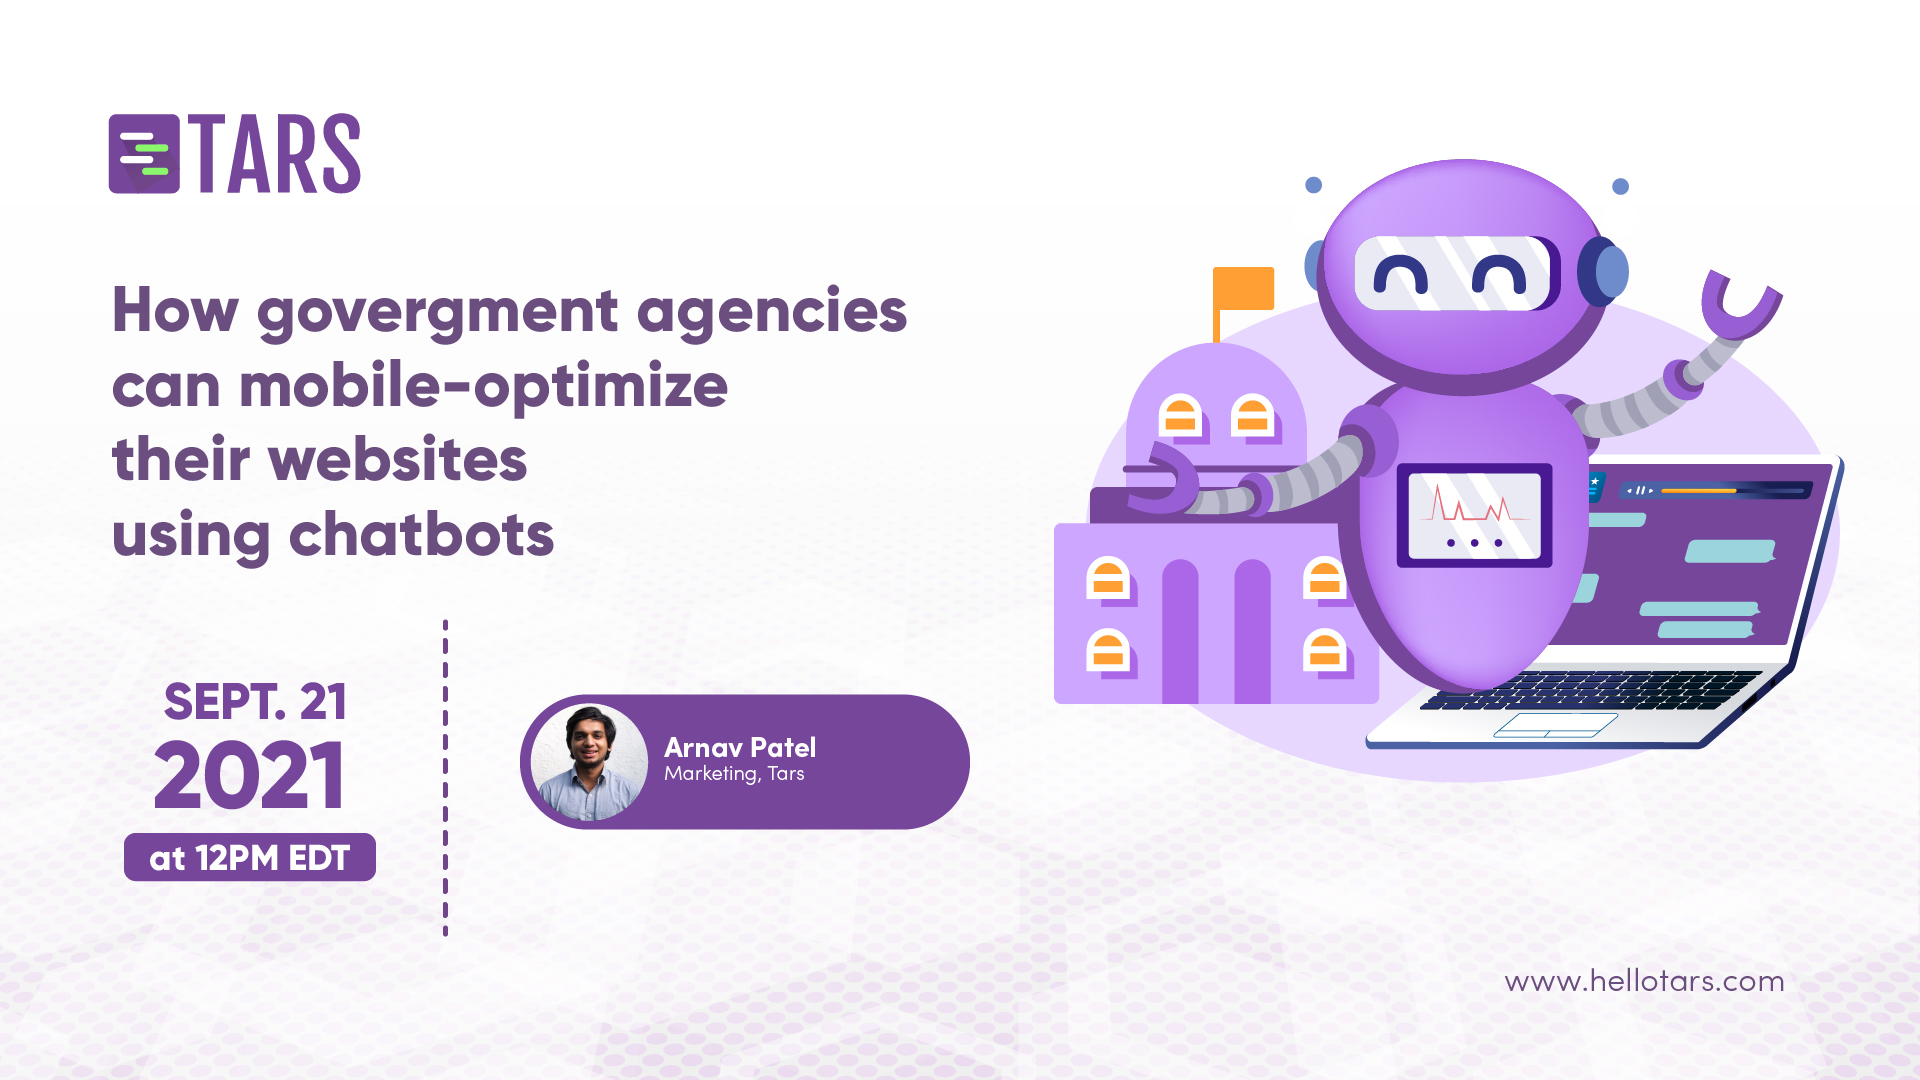 How government agencies can mobile optimize their websites using chatbots